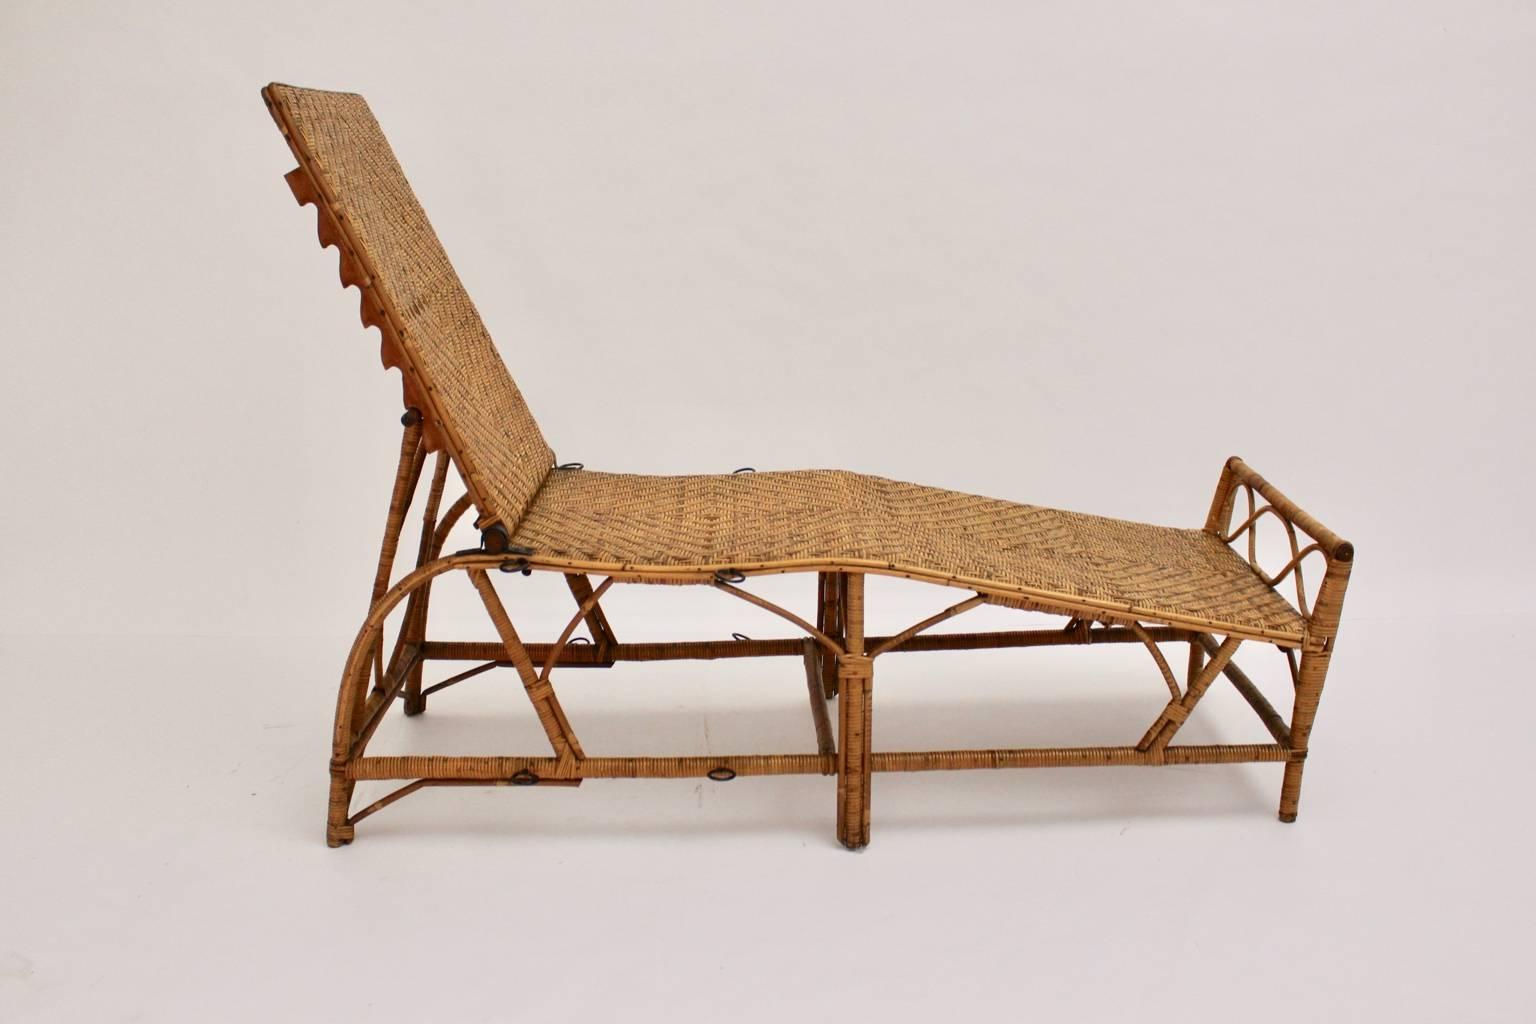 Rattan Art Deco Vintage Chaise Longue by Perret & Vibert Attributed France 1920s For Sale 1